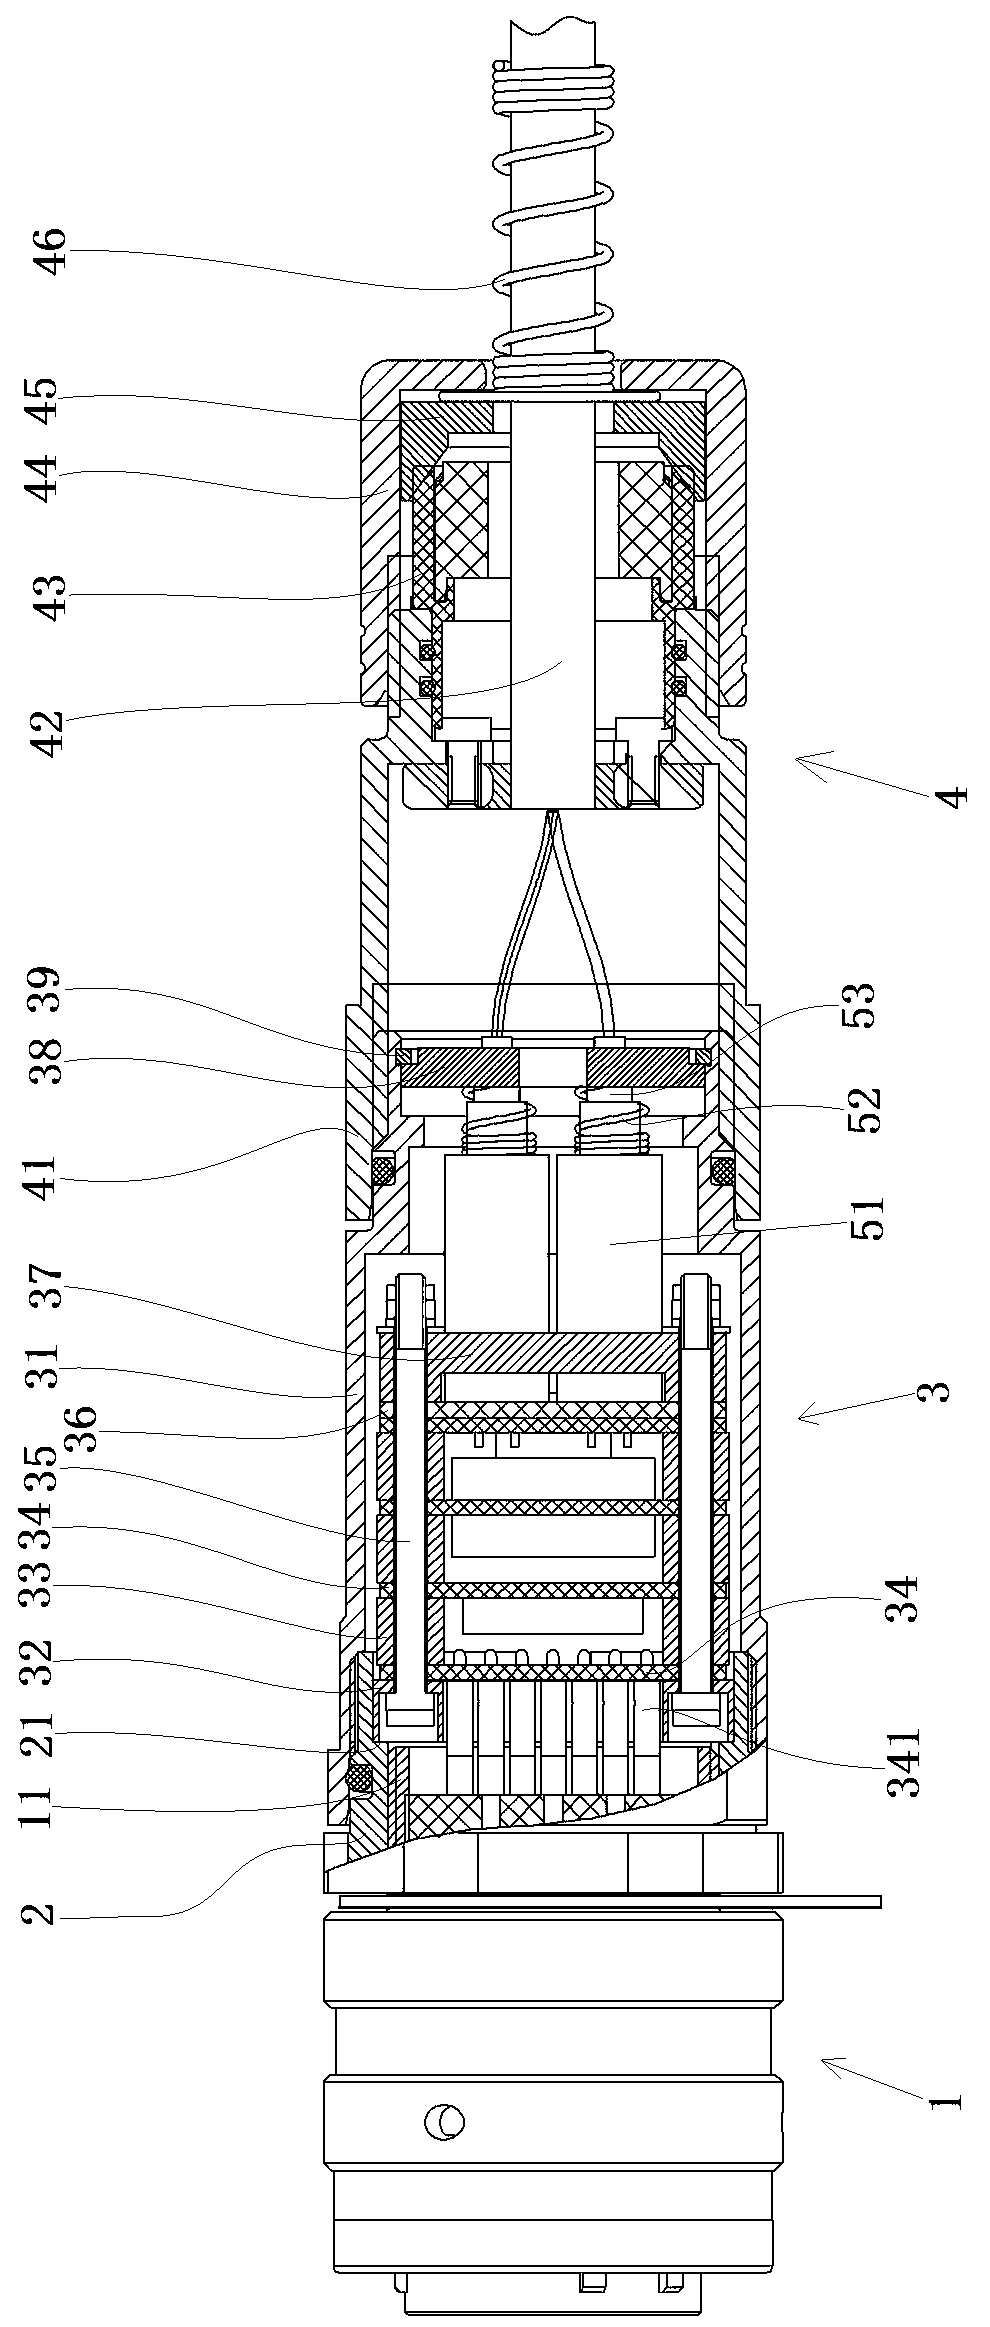 Active optical cable connector and active optical cable assembly using the active optical cable connector